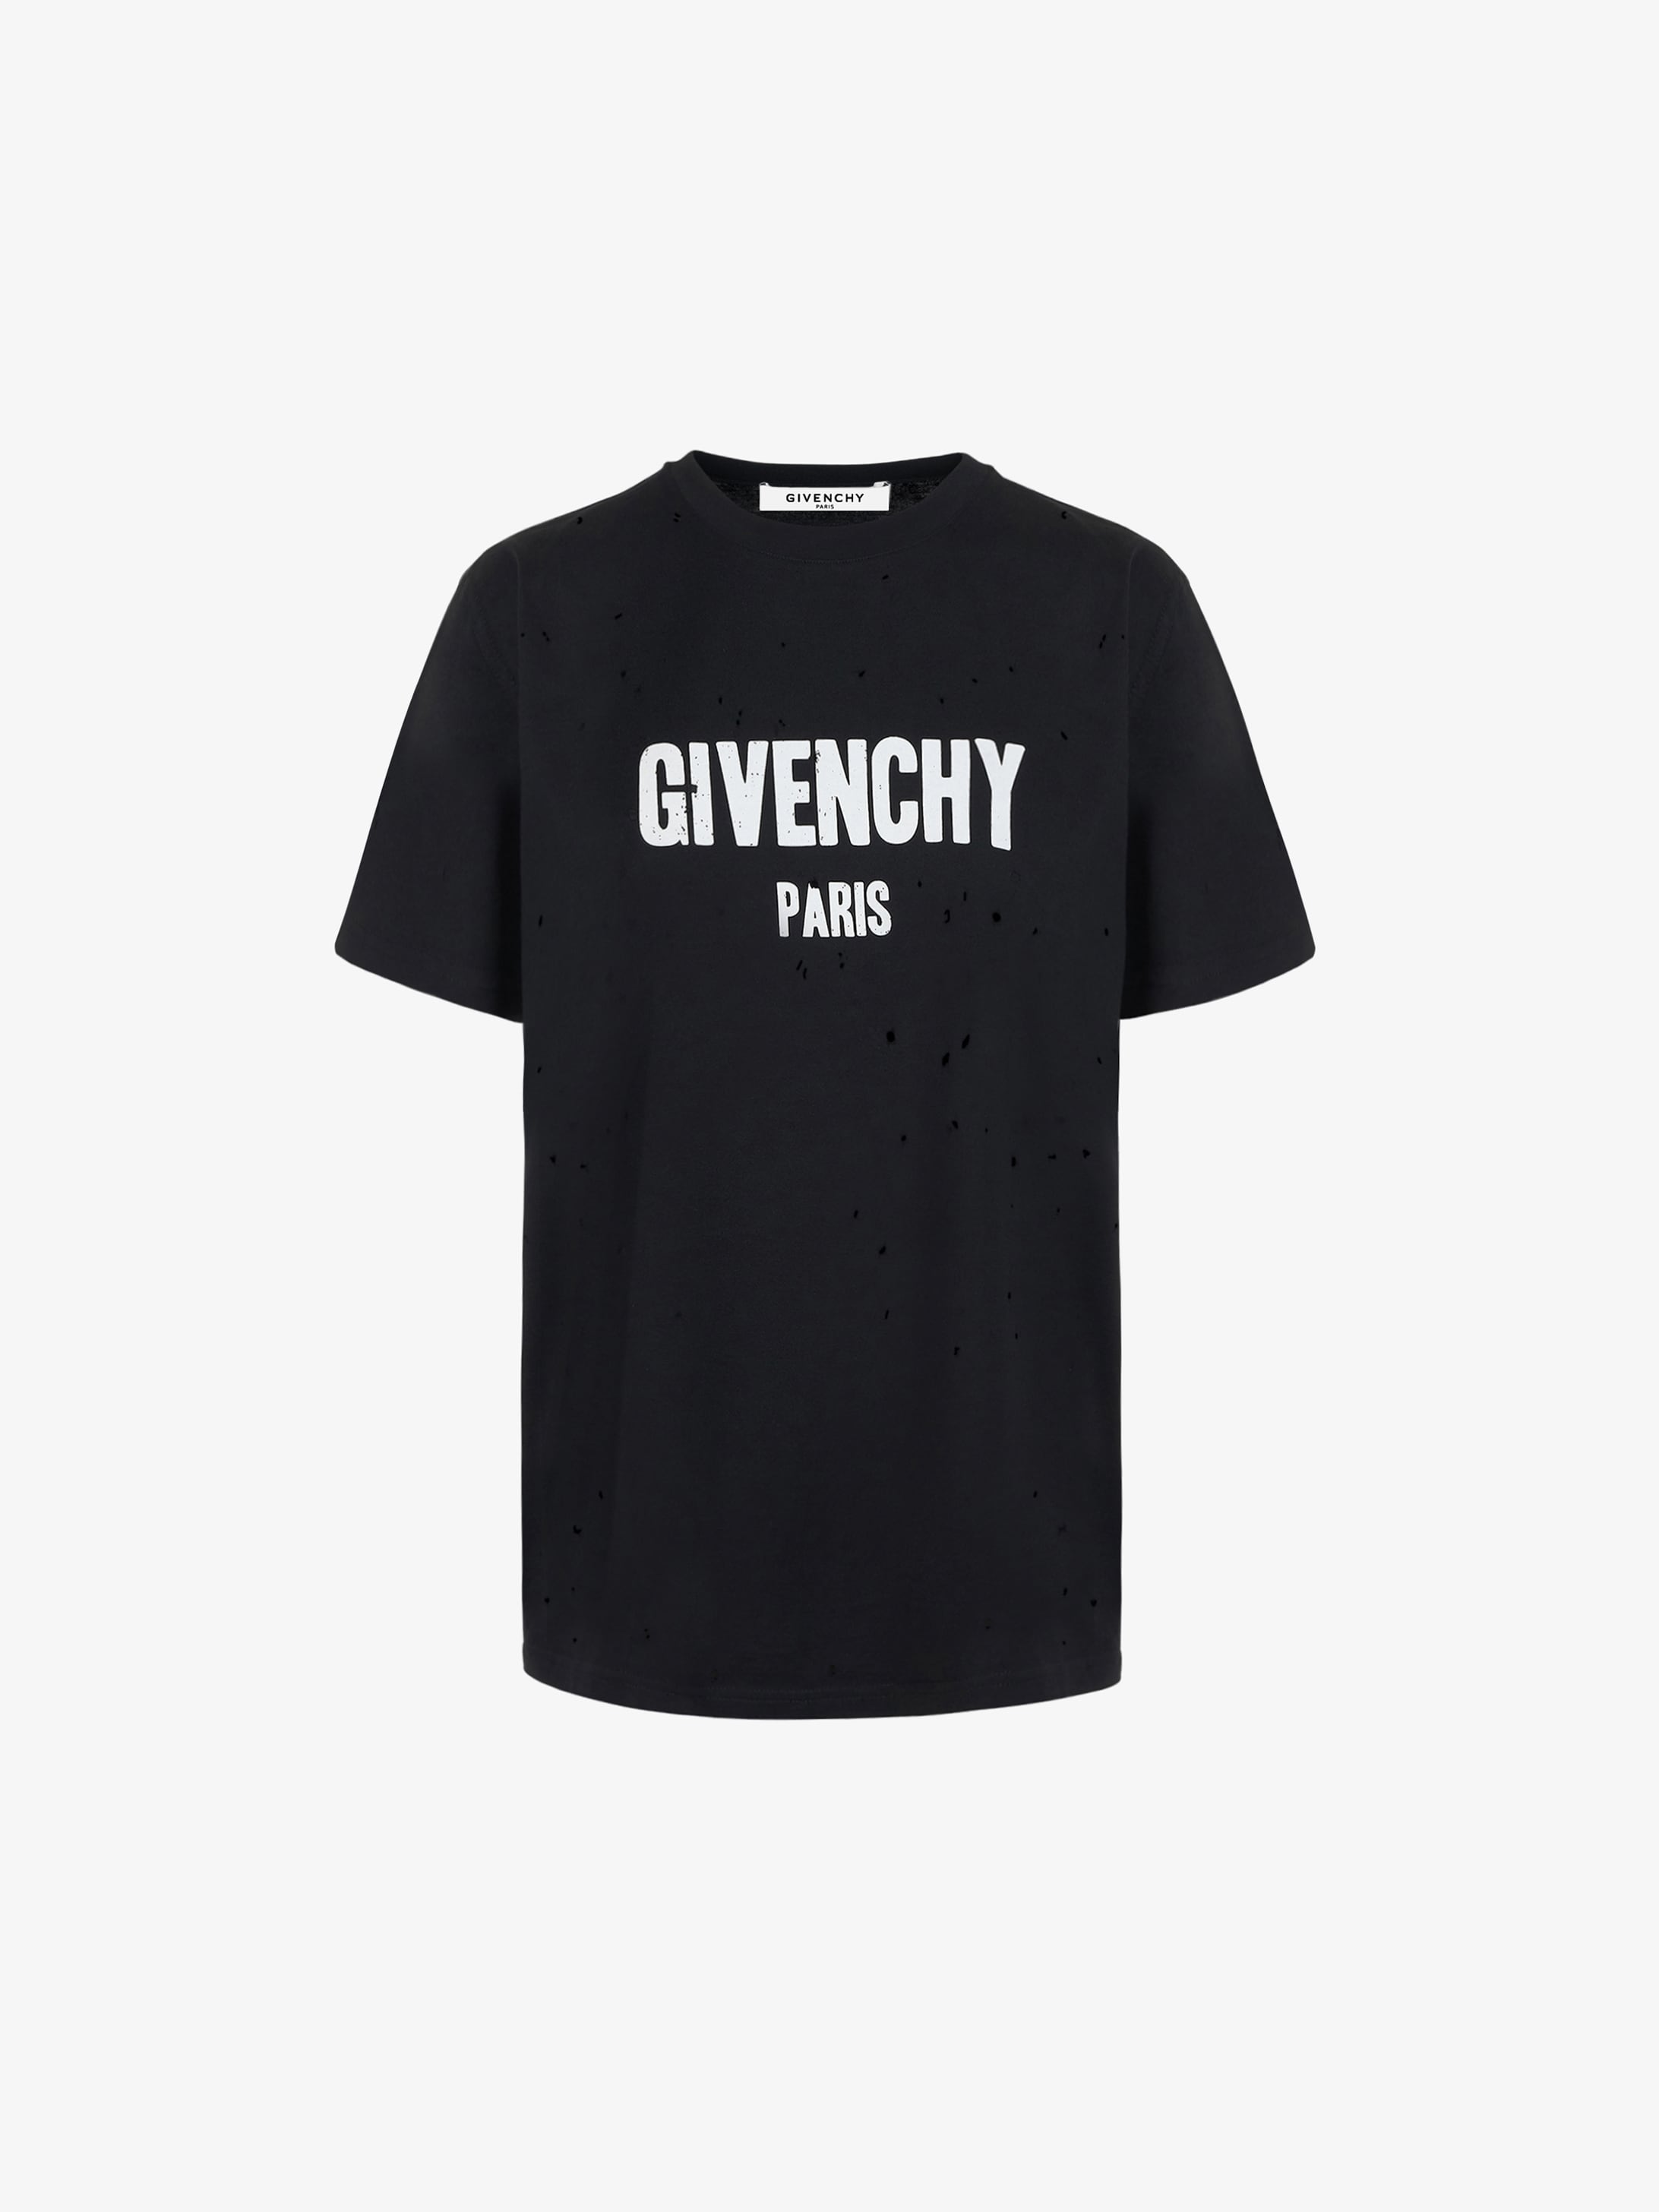 givenchy distressed t shirt off 52 